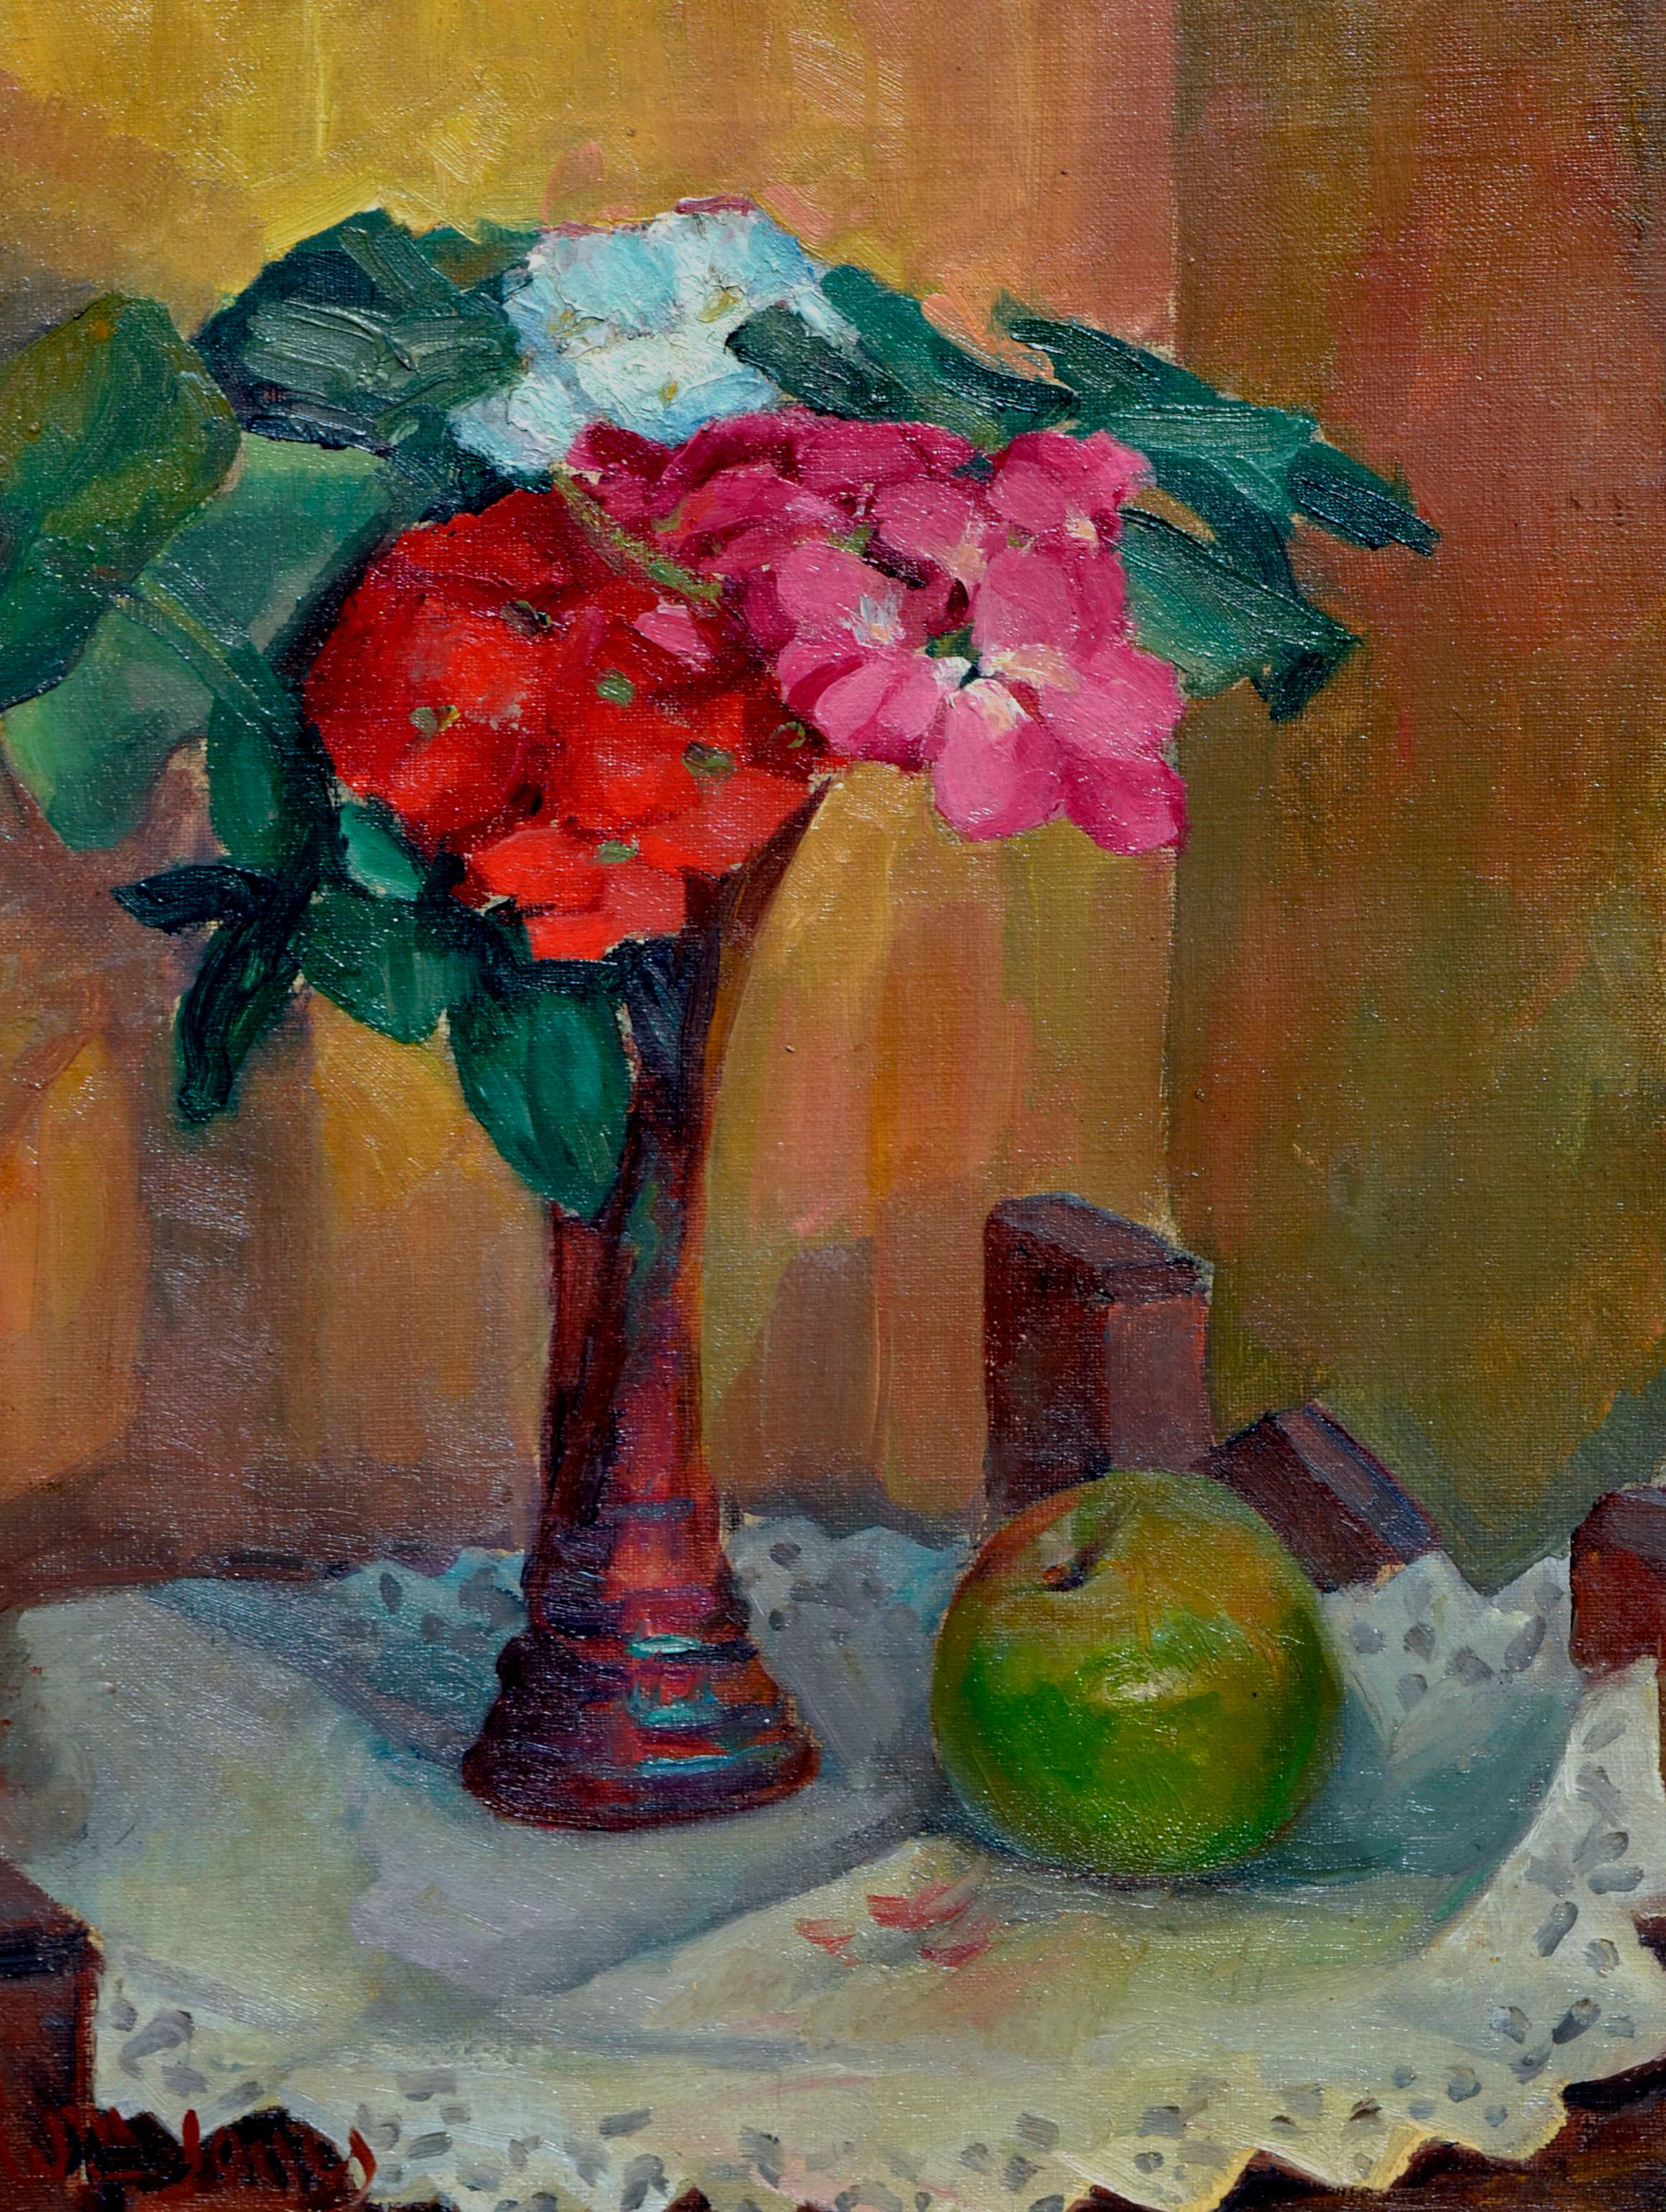 Floral Still Life with Apple - Painting by William John Jones